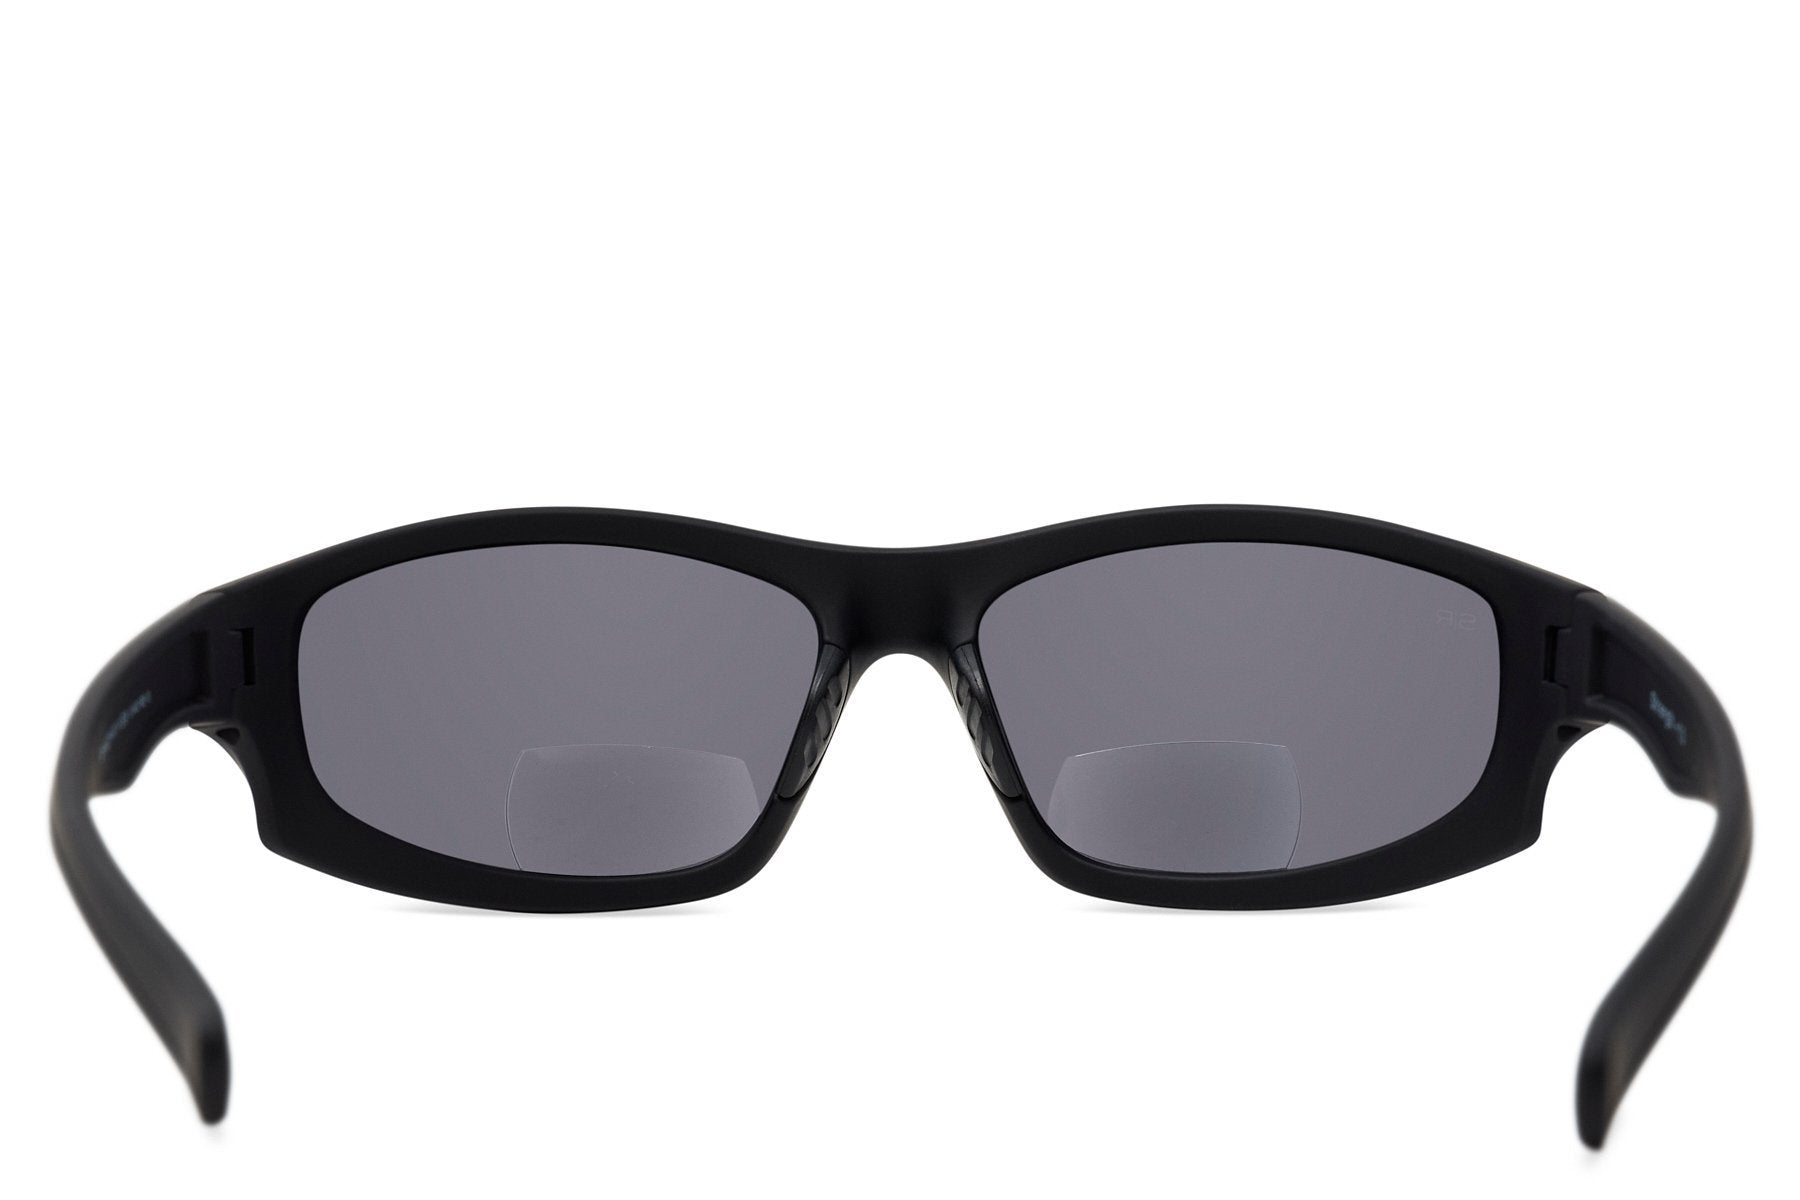 X Series Readers +2.5 - Blackout Reading Sunglasses Shady Rays 